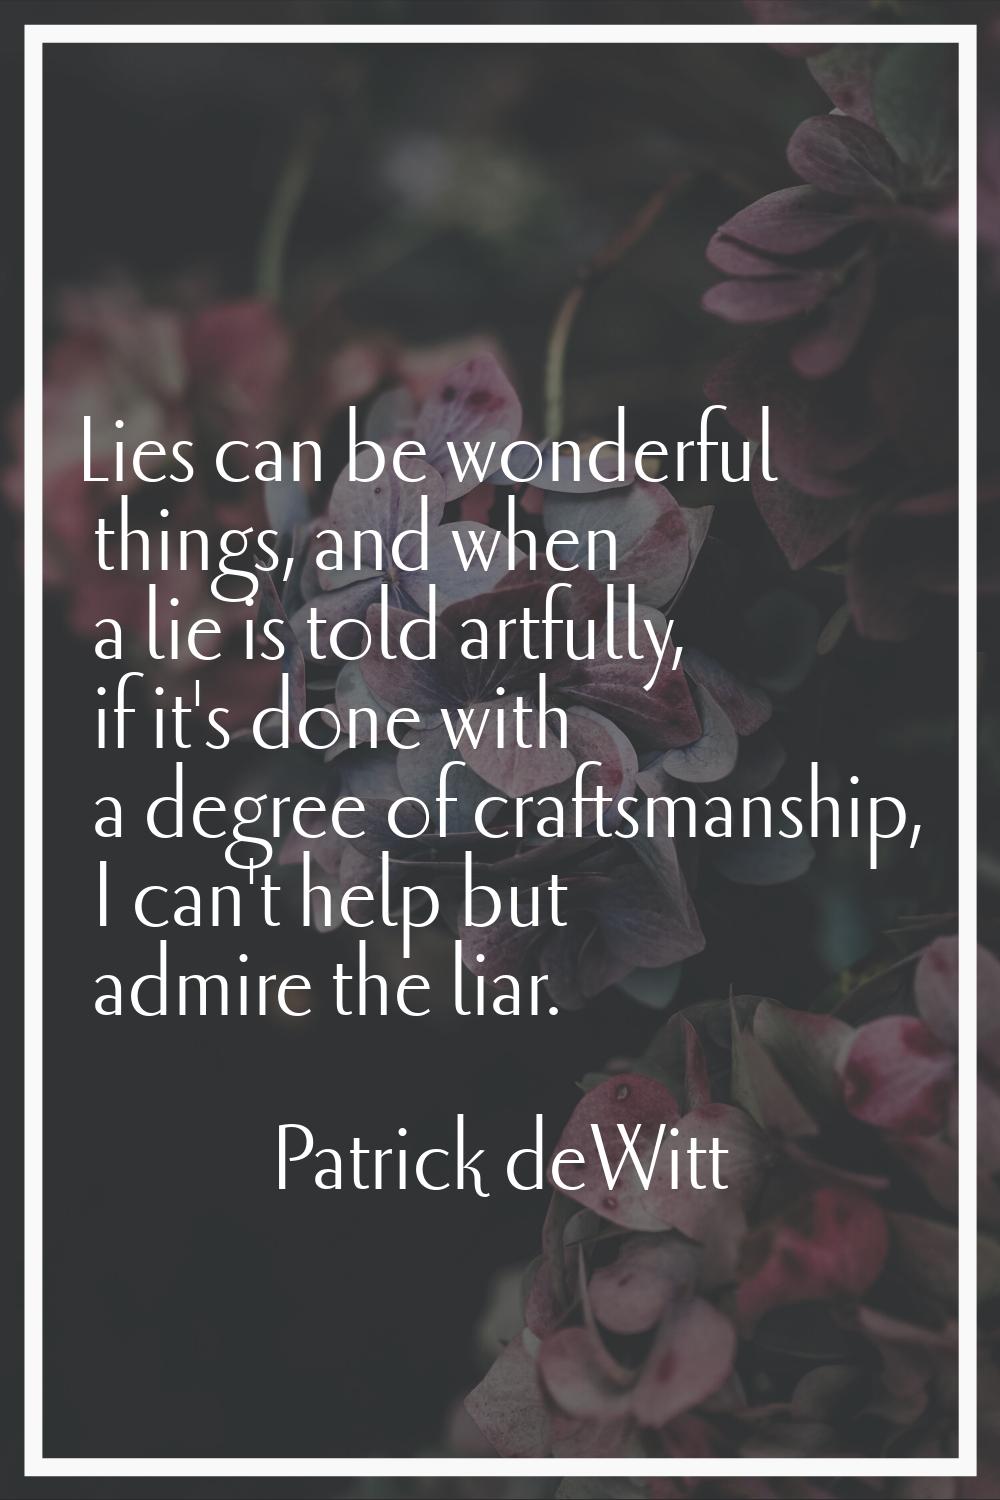 Lies can be wonderful things, and when a lie is told artfully, if it's done with a degree of crafts